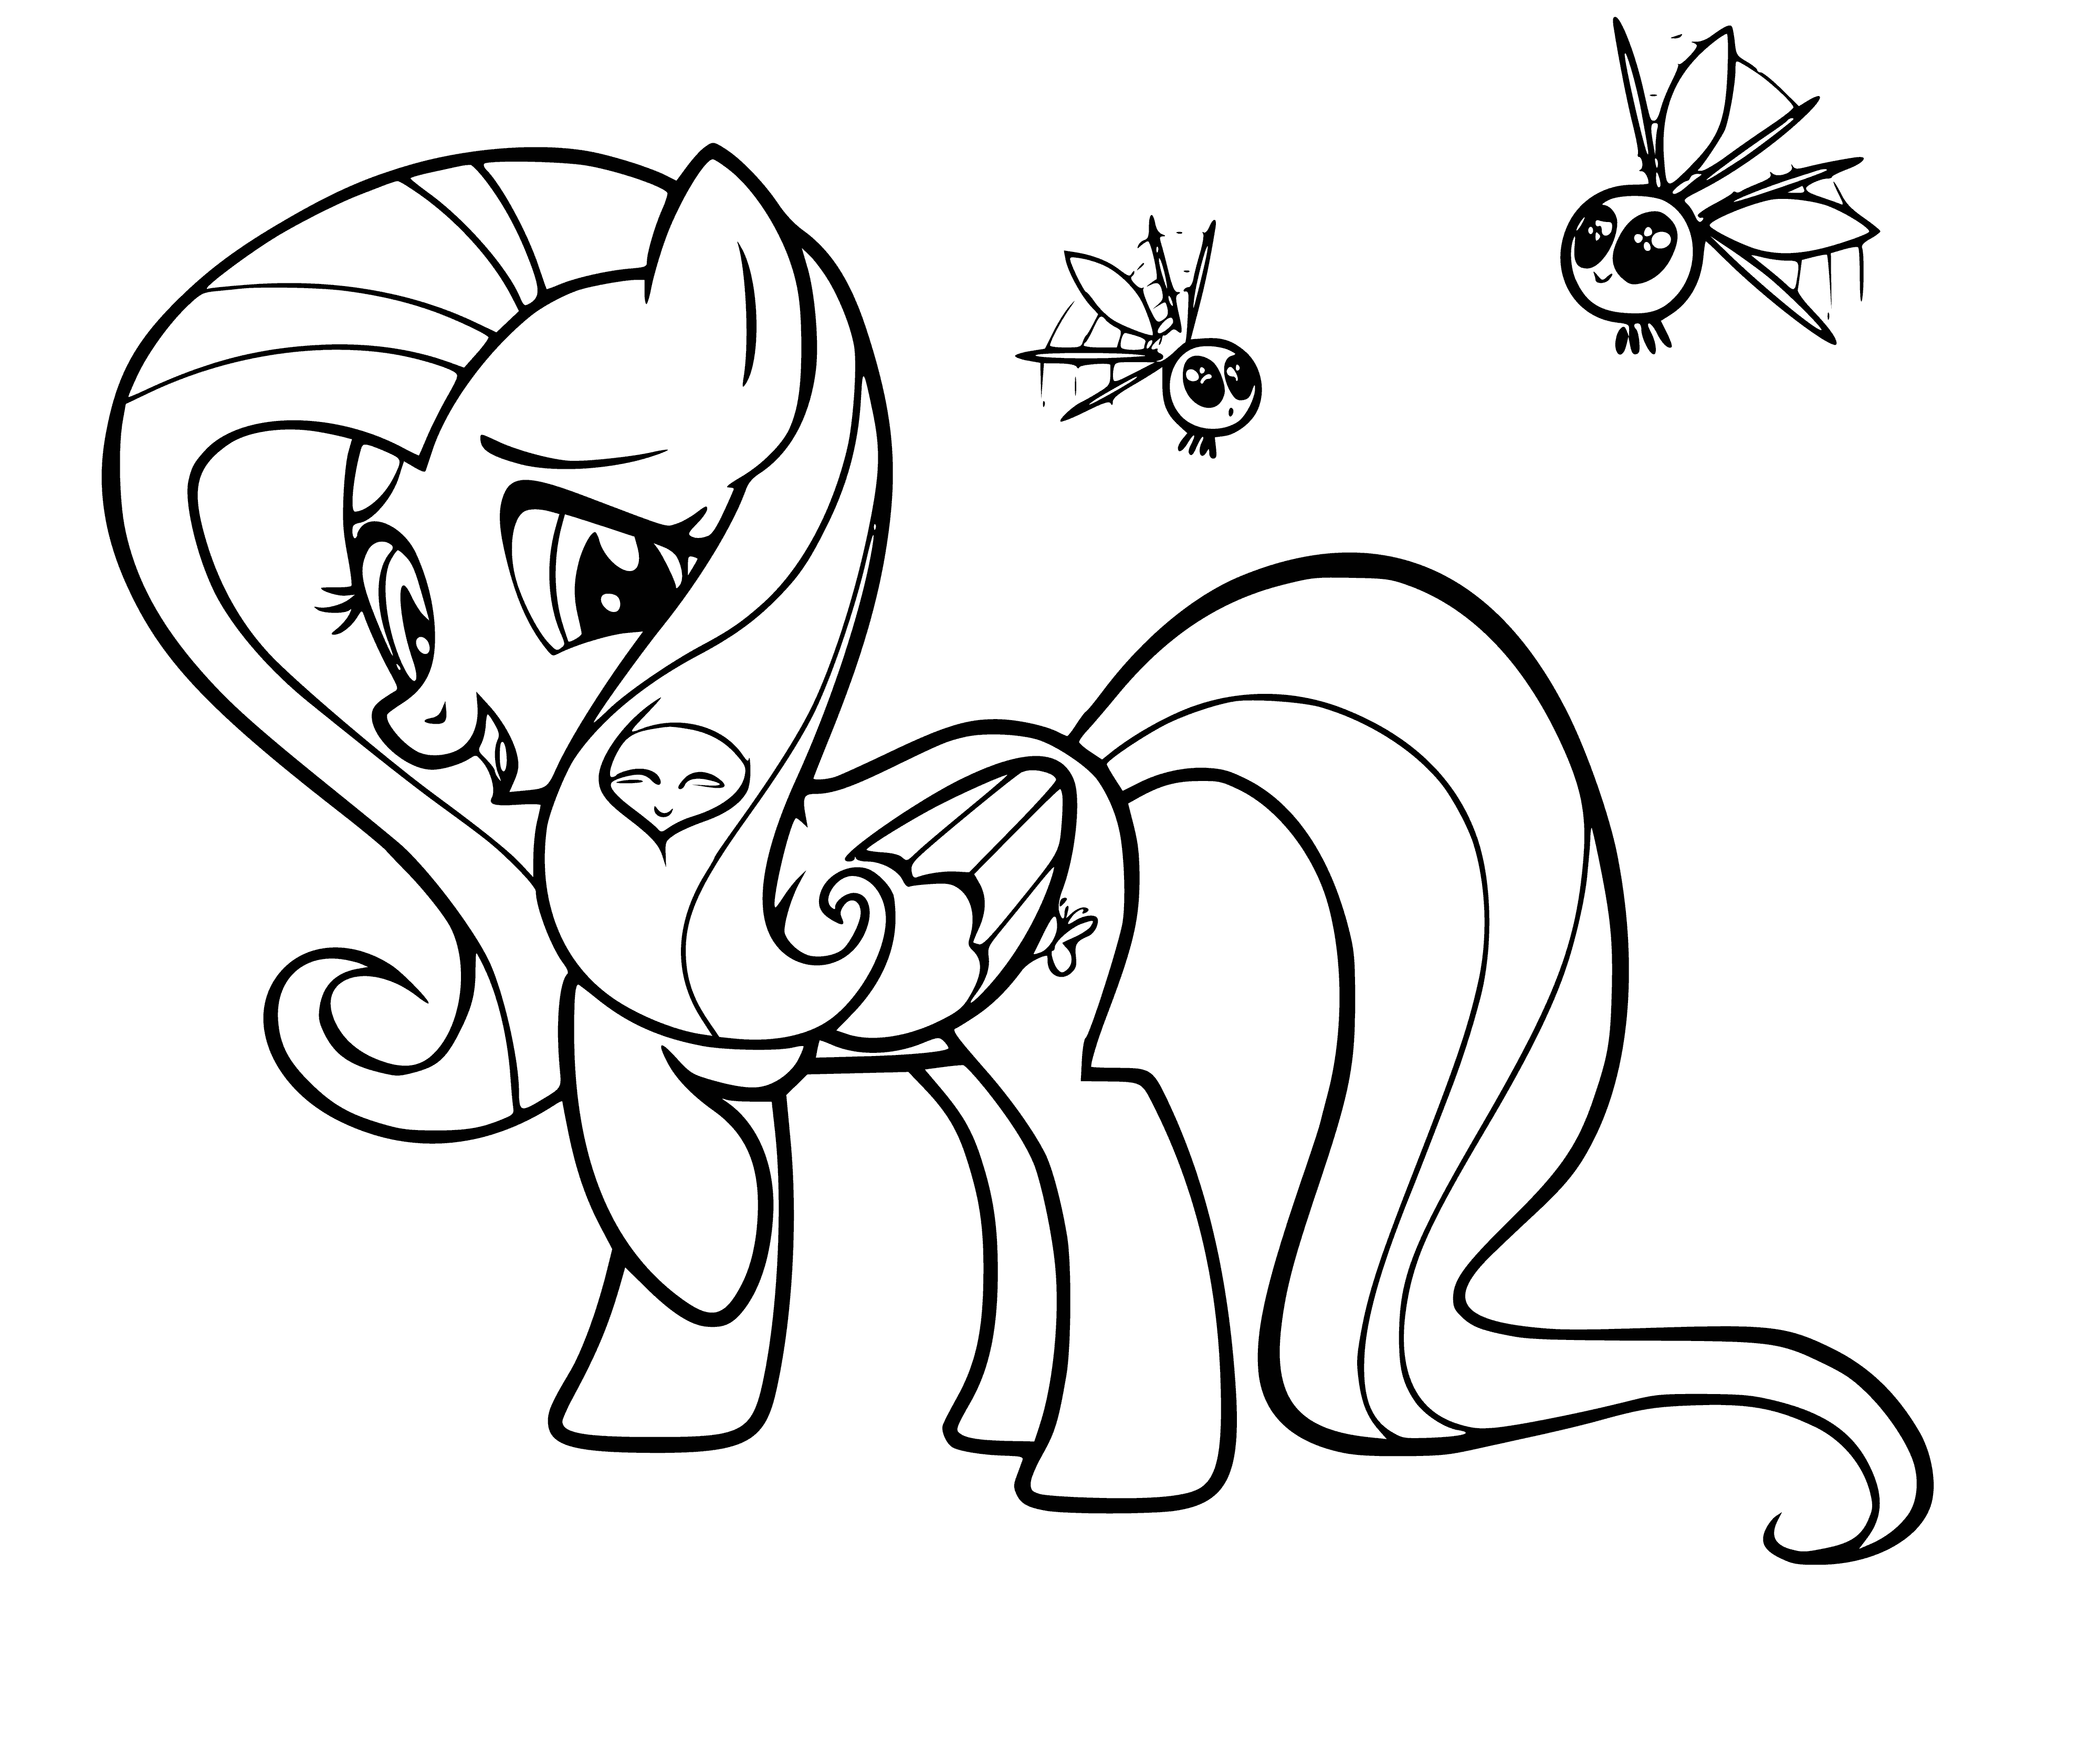 coloring page: A purple pony with a flowing pink mane, blue eyes, and a pink scarf.